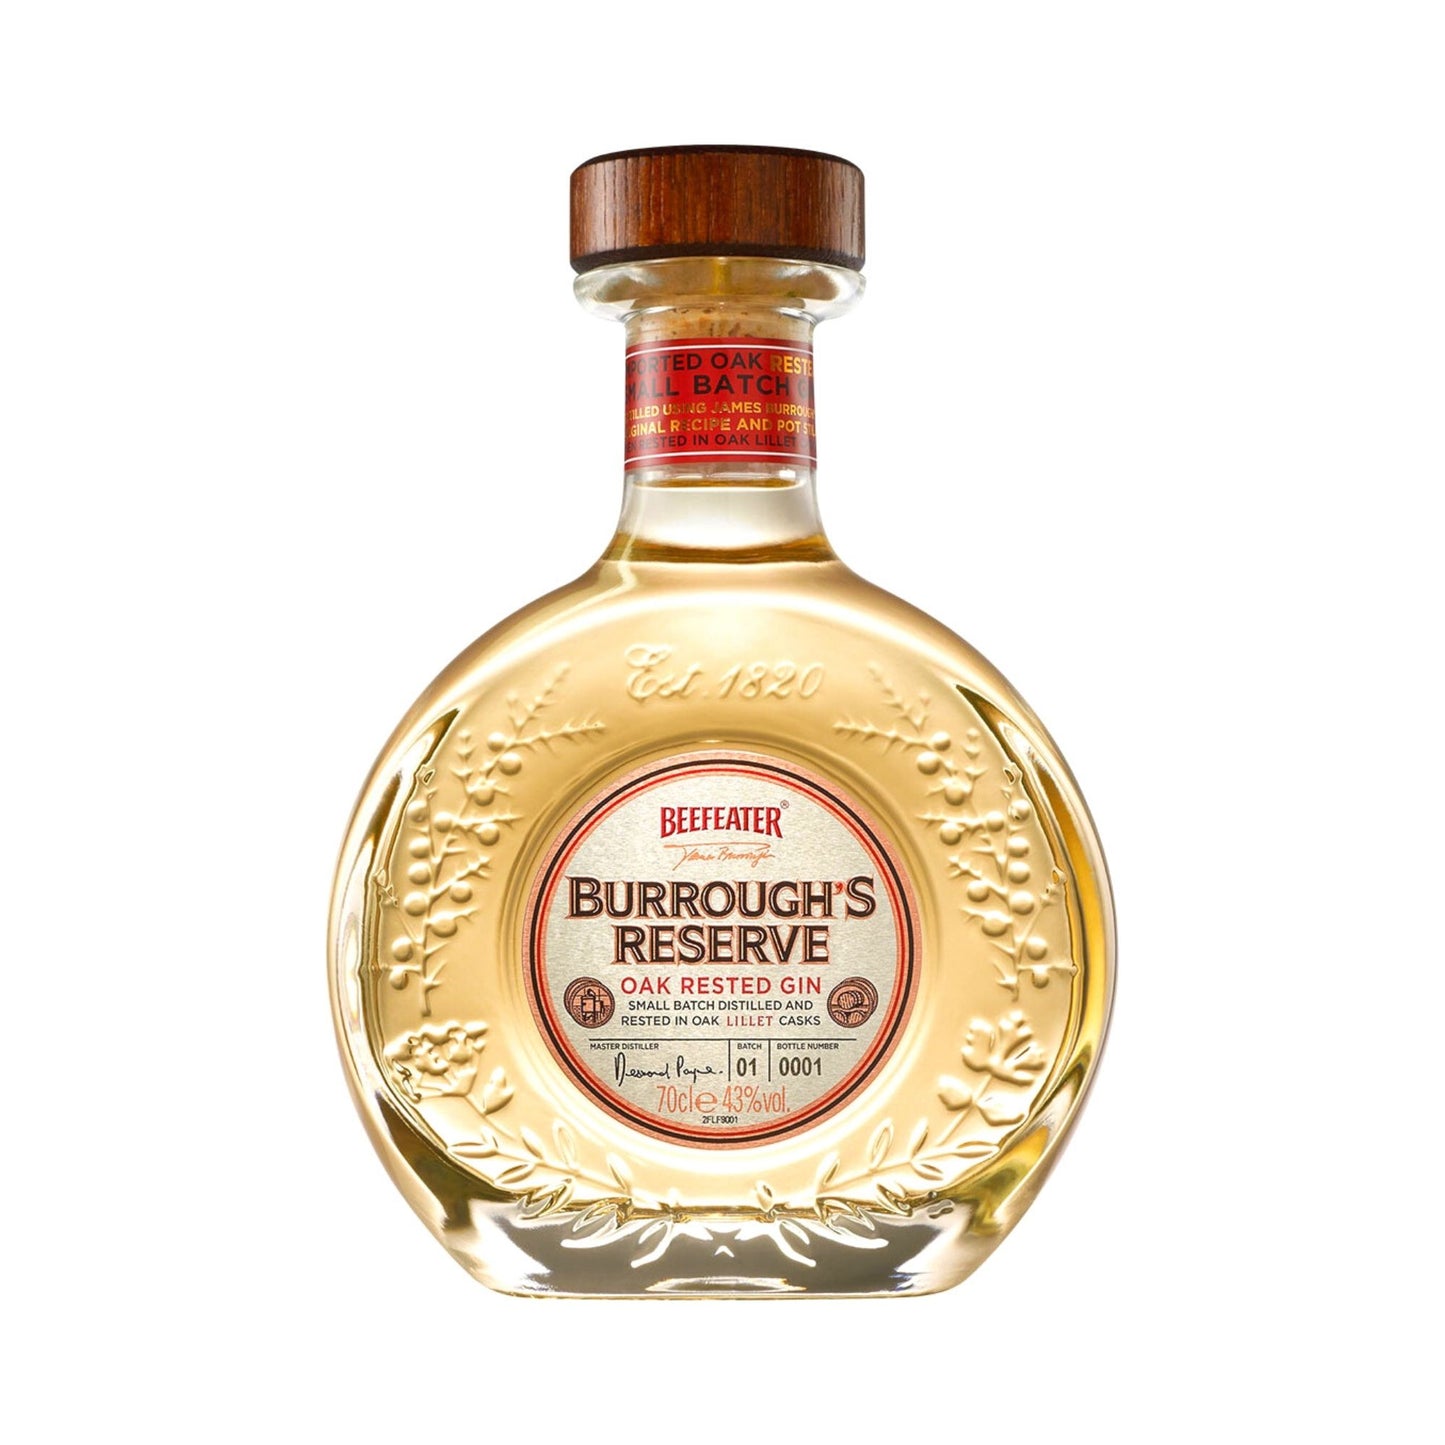 BEEFEATER BURROUGH'S RESERVE  GIN 0.7LT